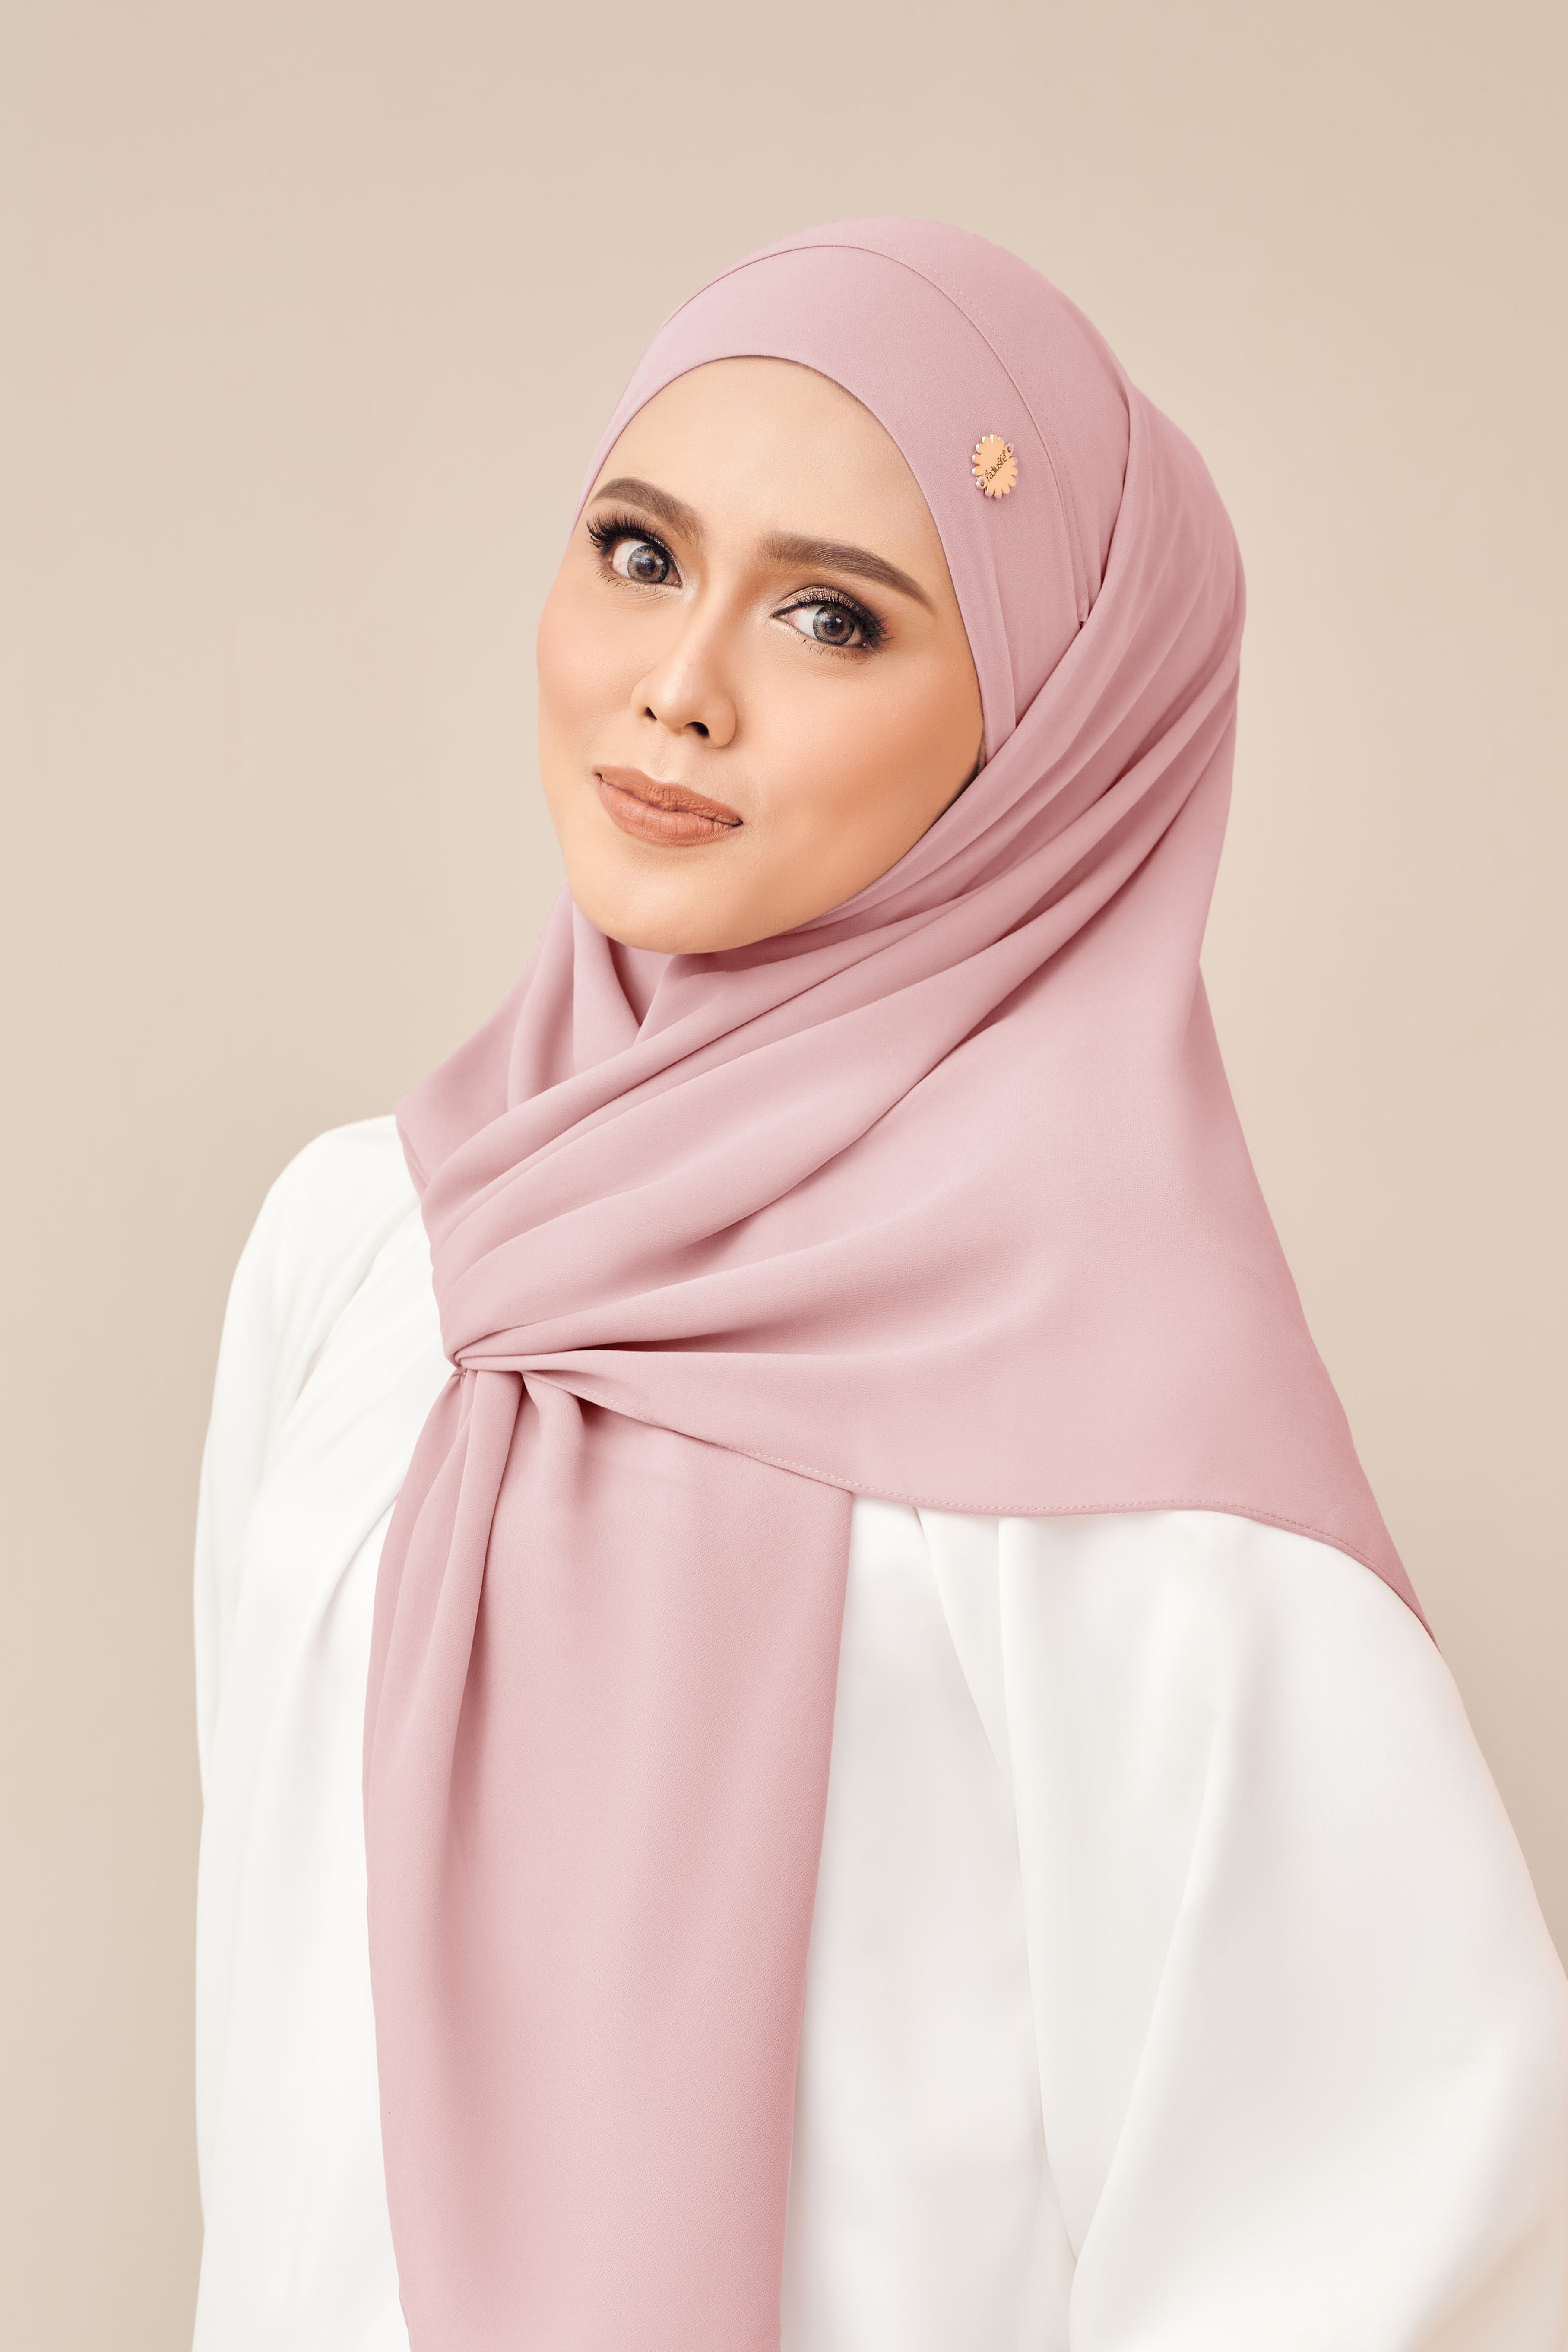 (AS-IS) ROSE Bawal Lazy in Pink